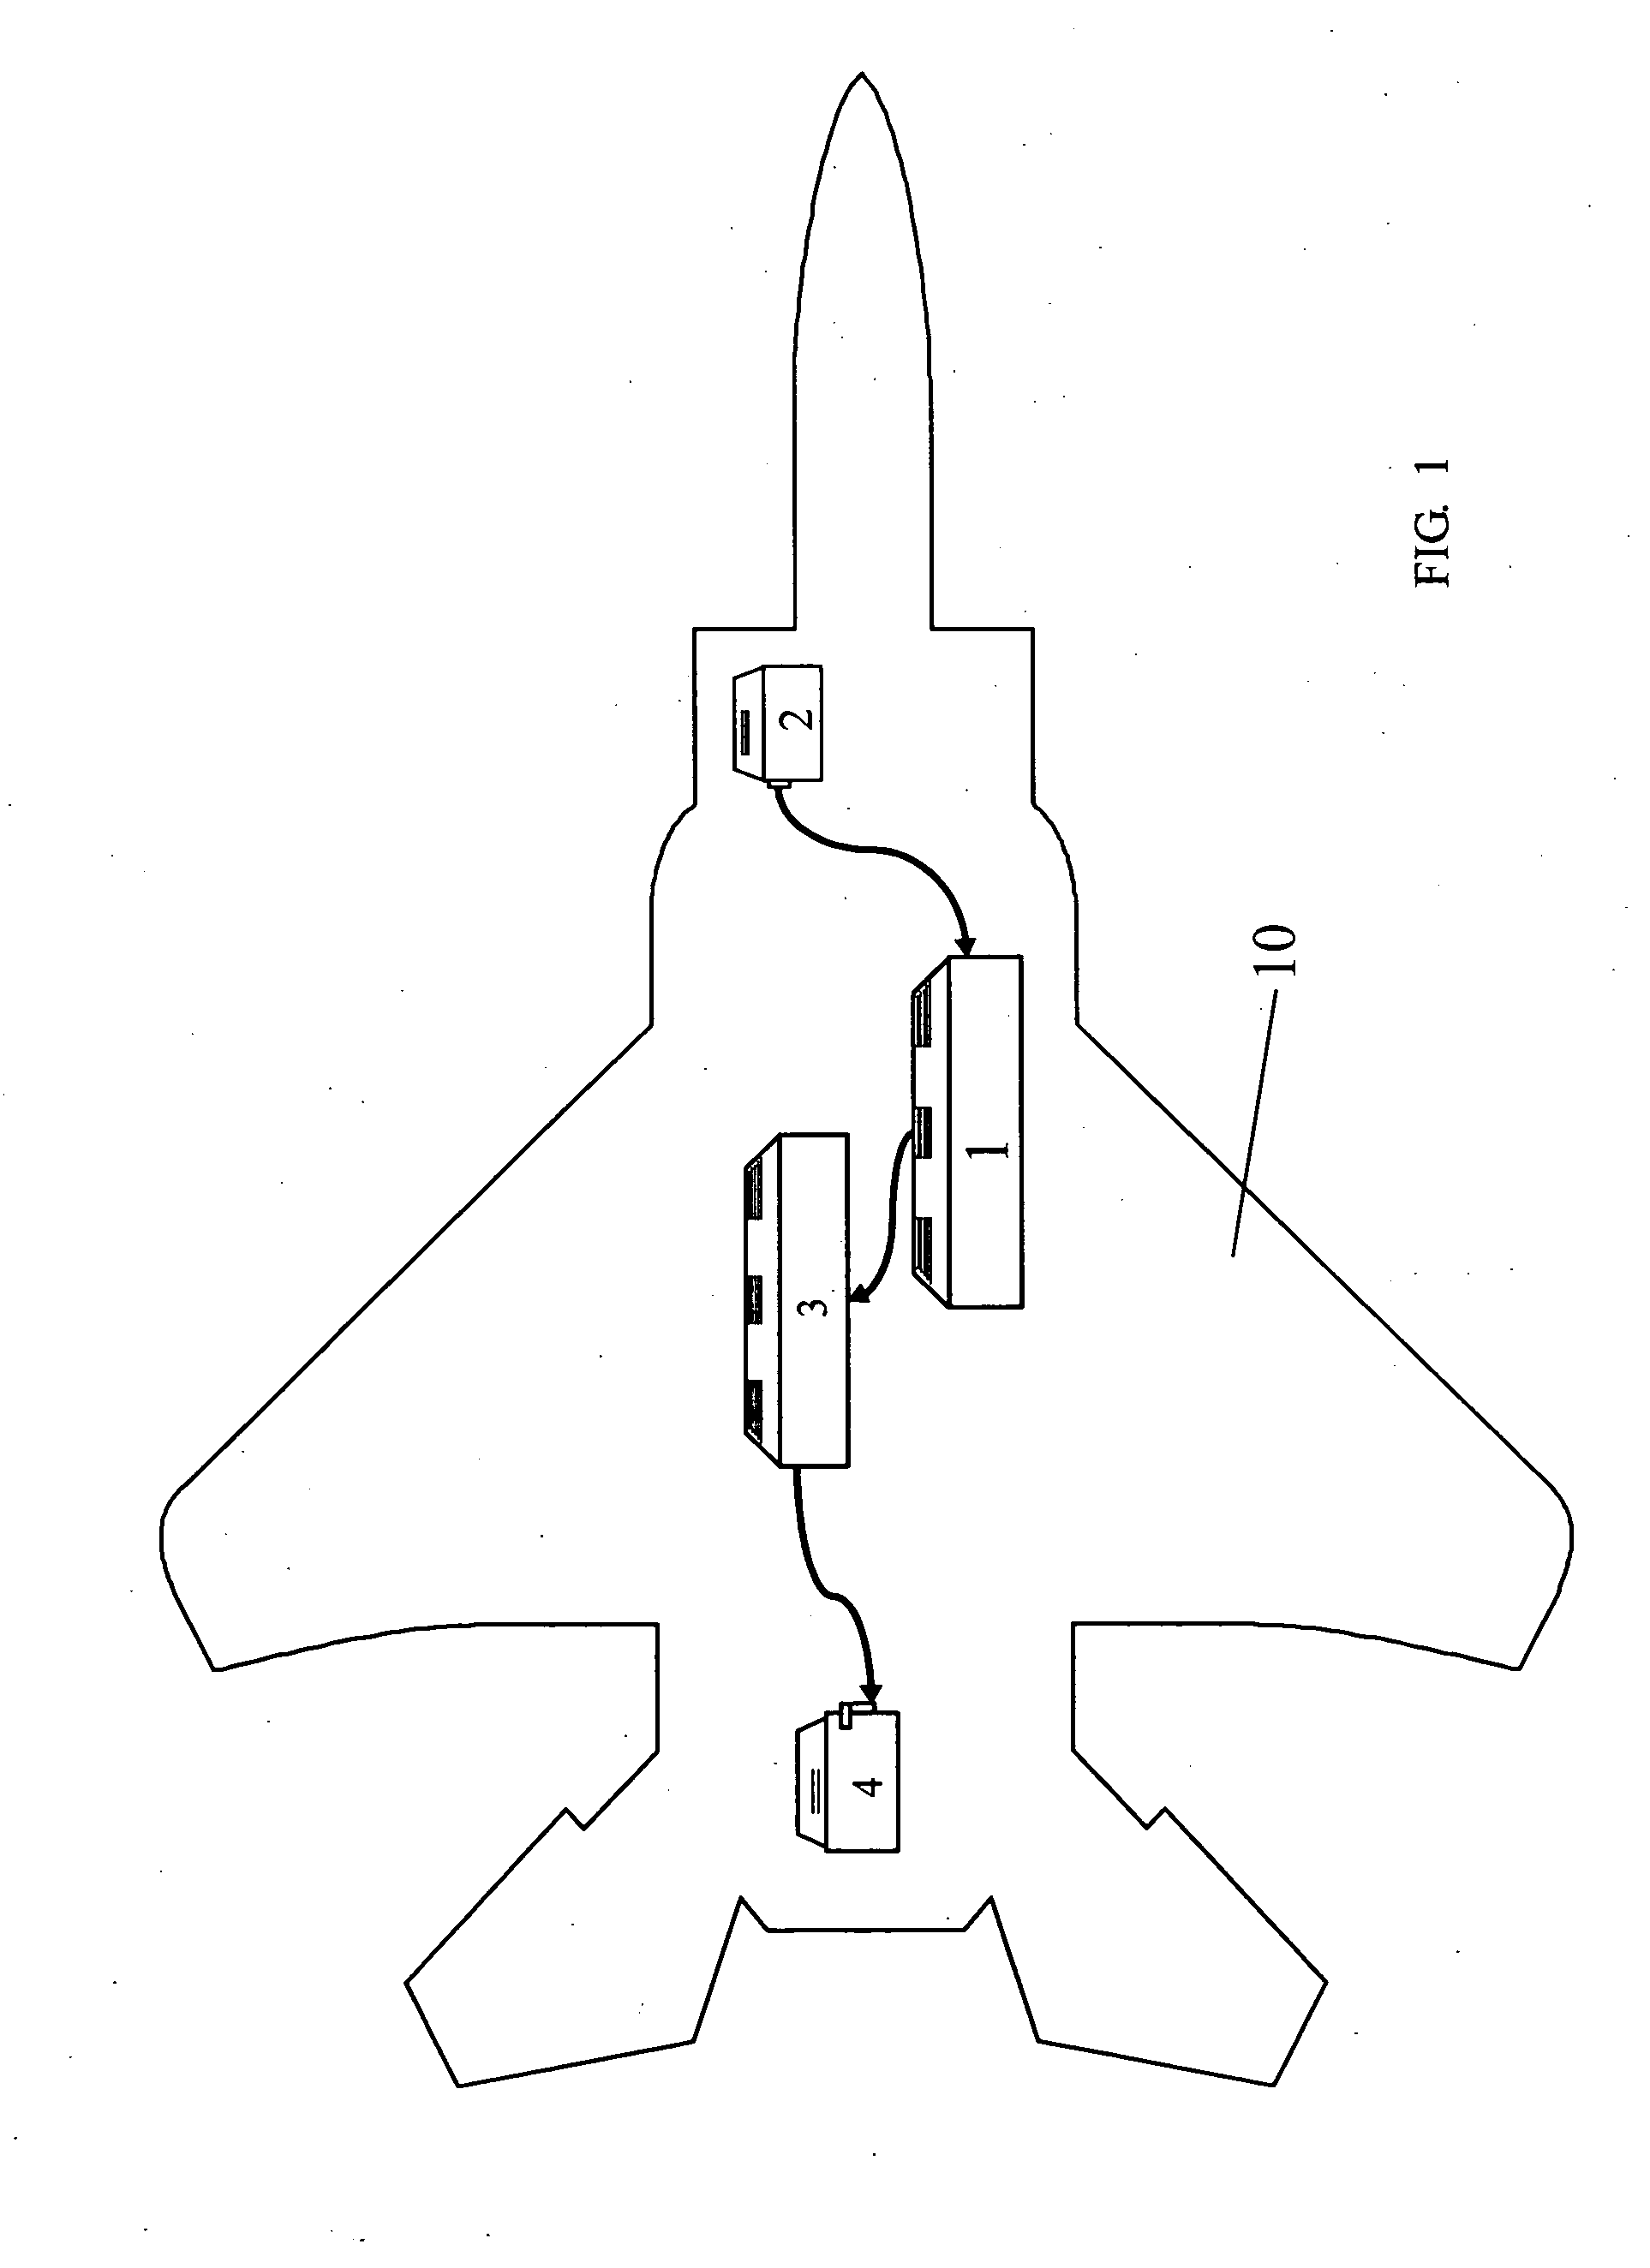 Sensor Fusion System and Method for Estimating Position, Speed and Orientation of a Vehicle, in Particular an Aircraft